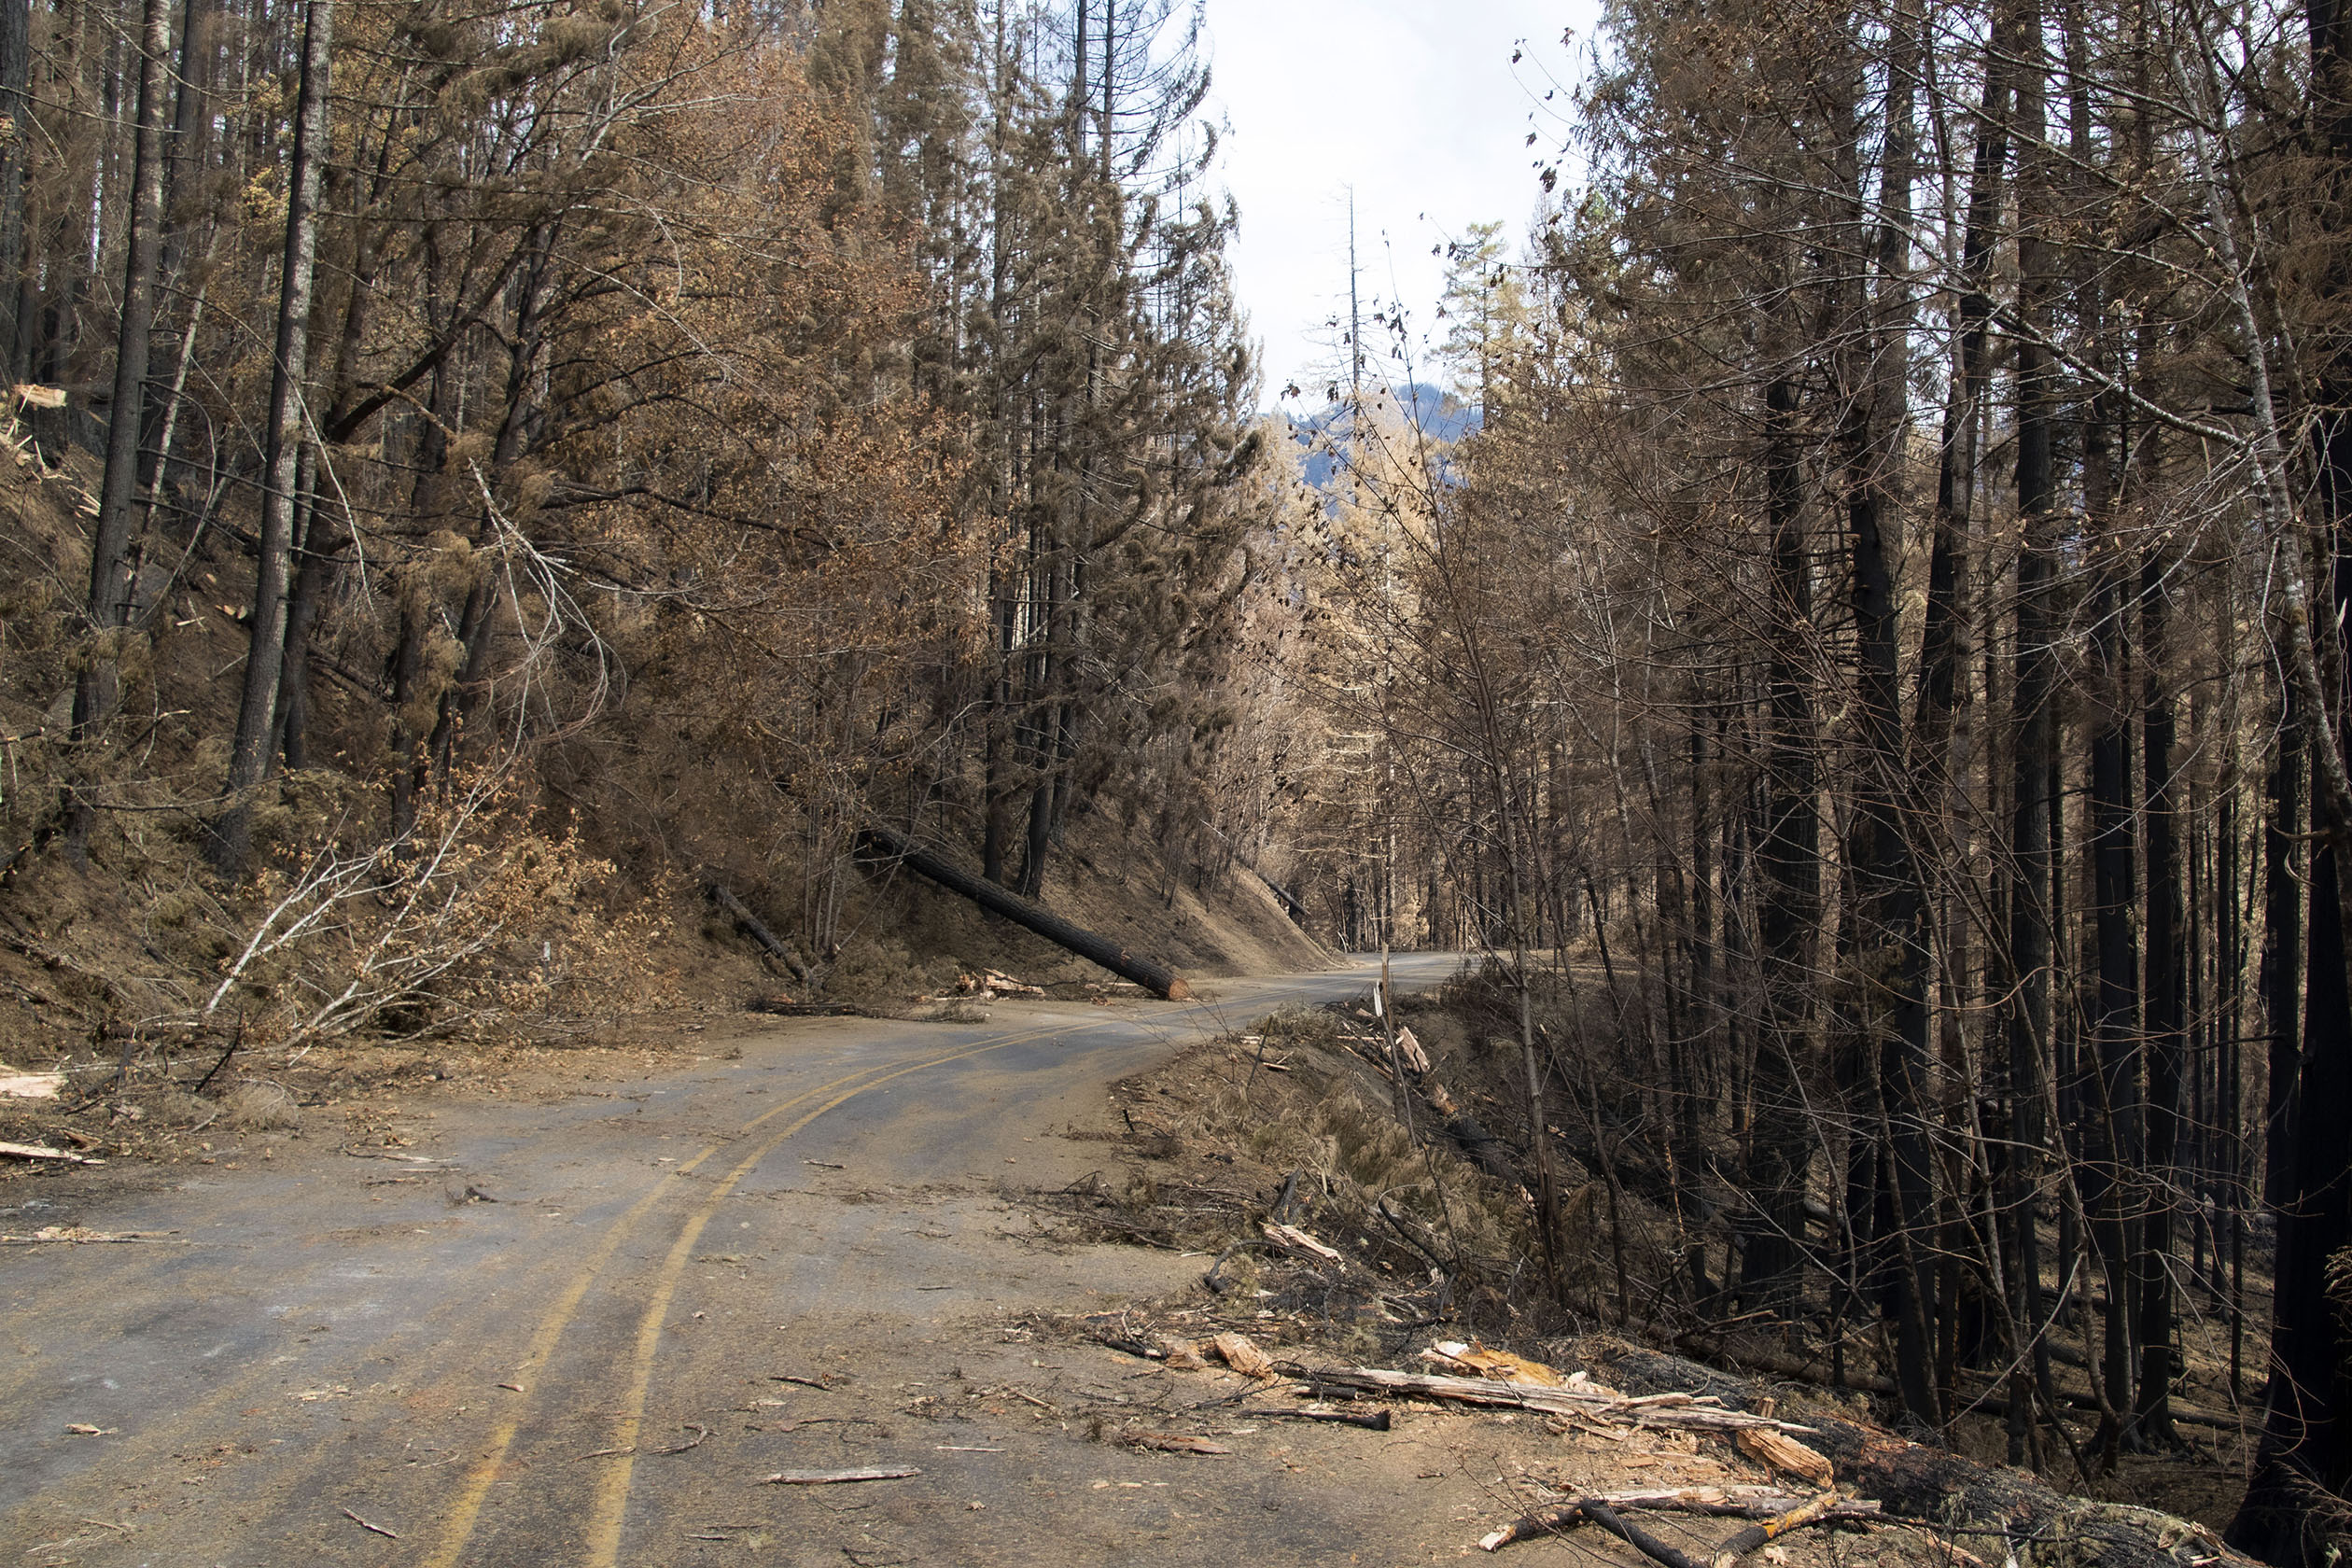 A narrow road curves through a forest burned by wildfire. The road is covered with fallen trees.